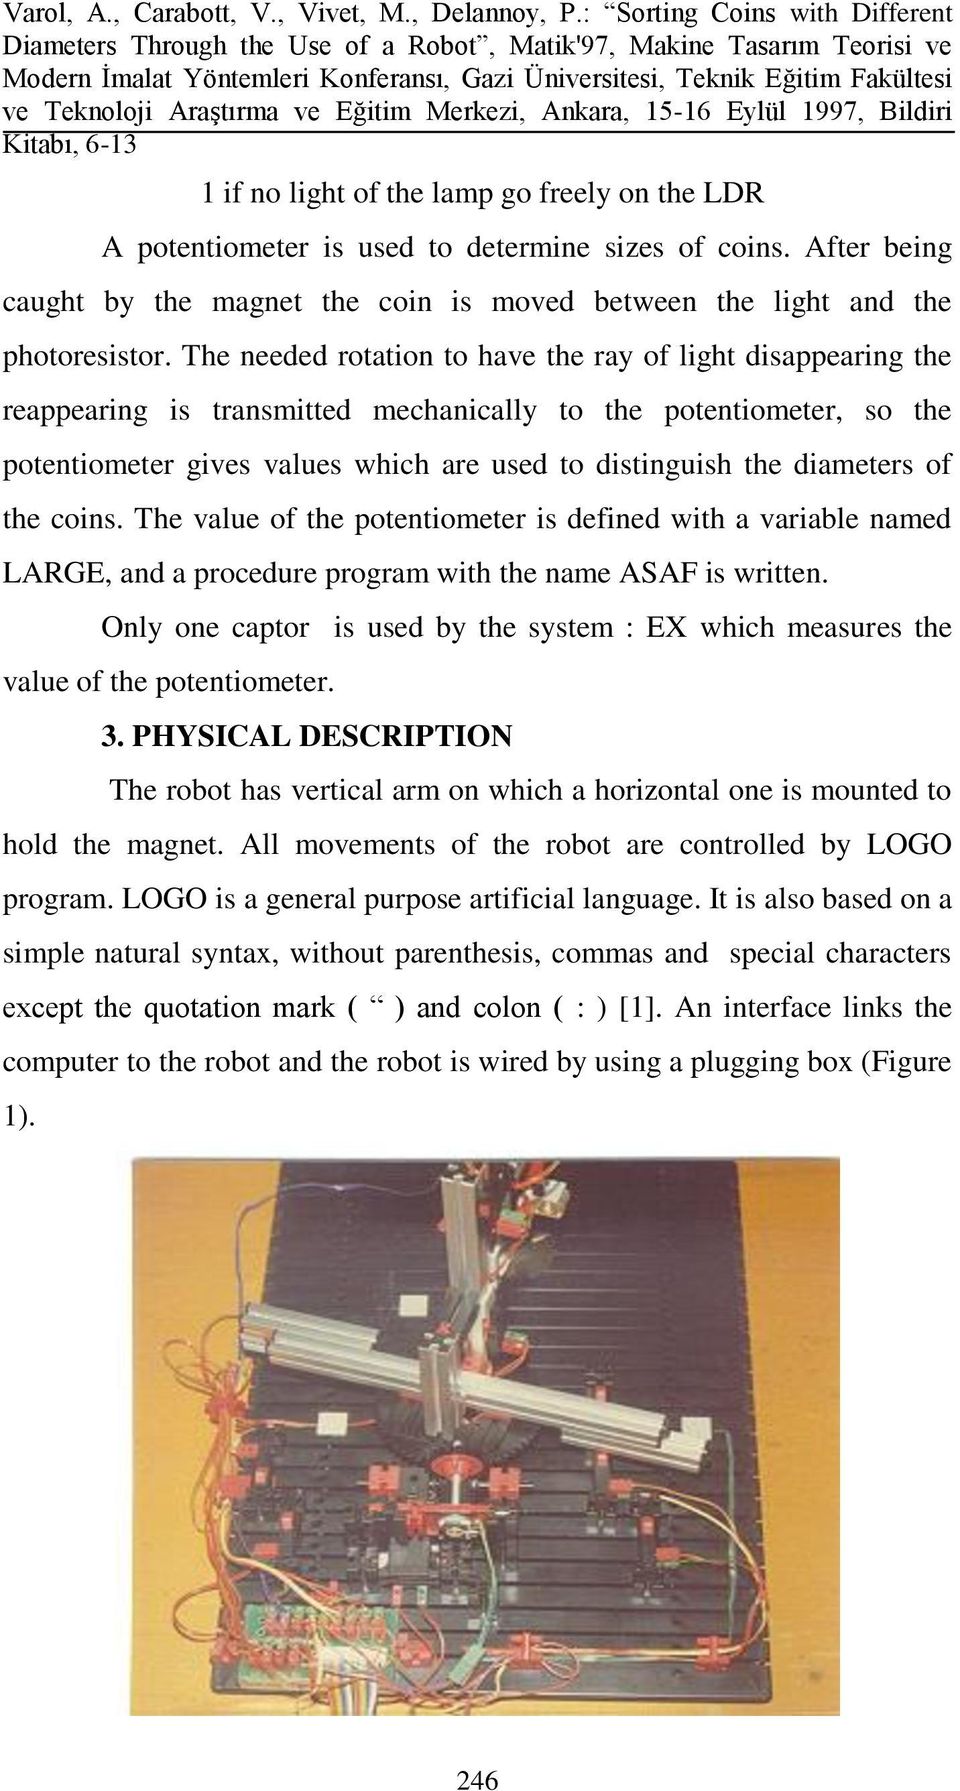 diameters of the coins. The value of the potentiometer is defined with a variable named LARGE, and a procedure program with the name ASAF is written.